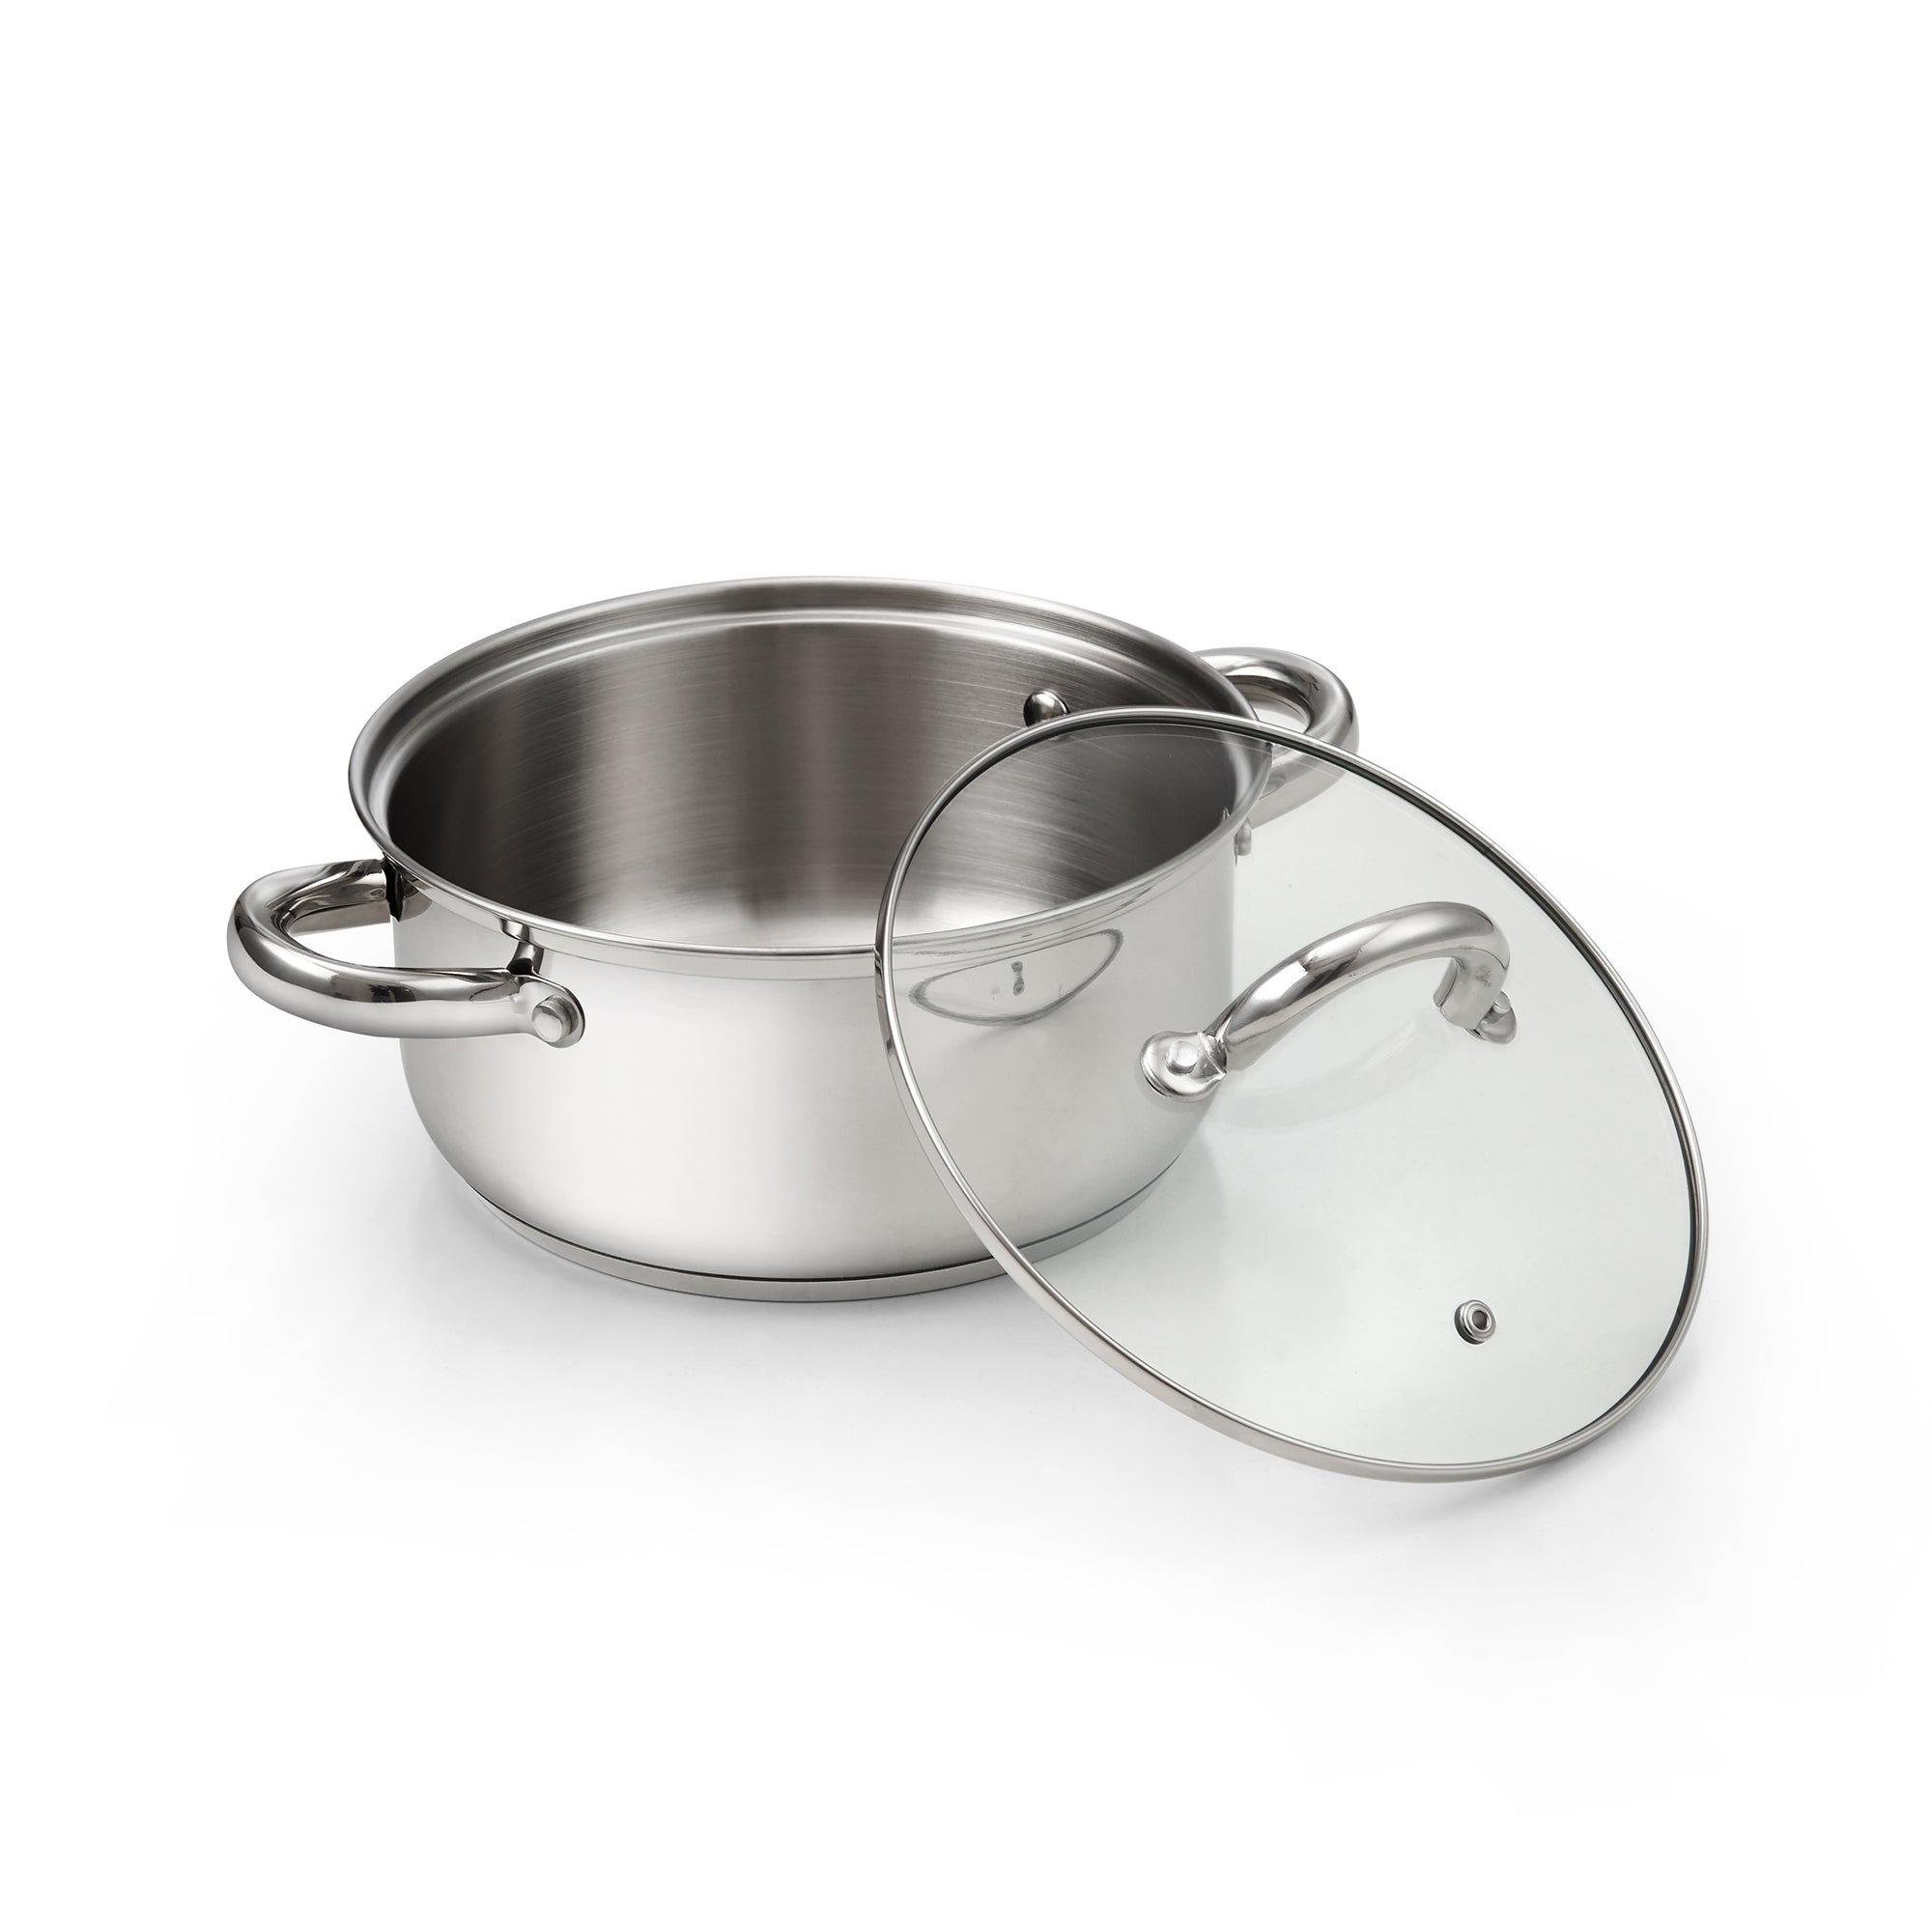 Cook N Home 3 Quart Stainless Steel Sauce Pot Casserole with Lid